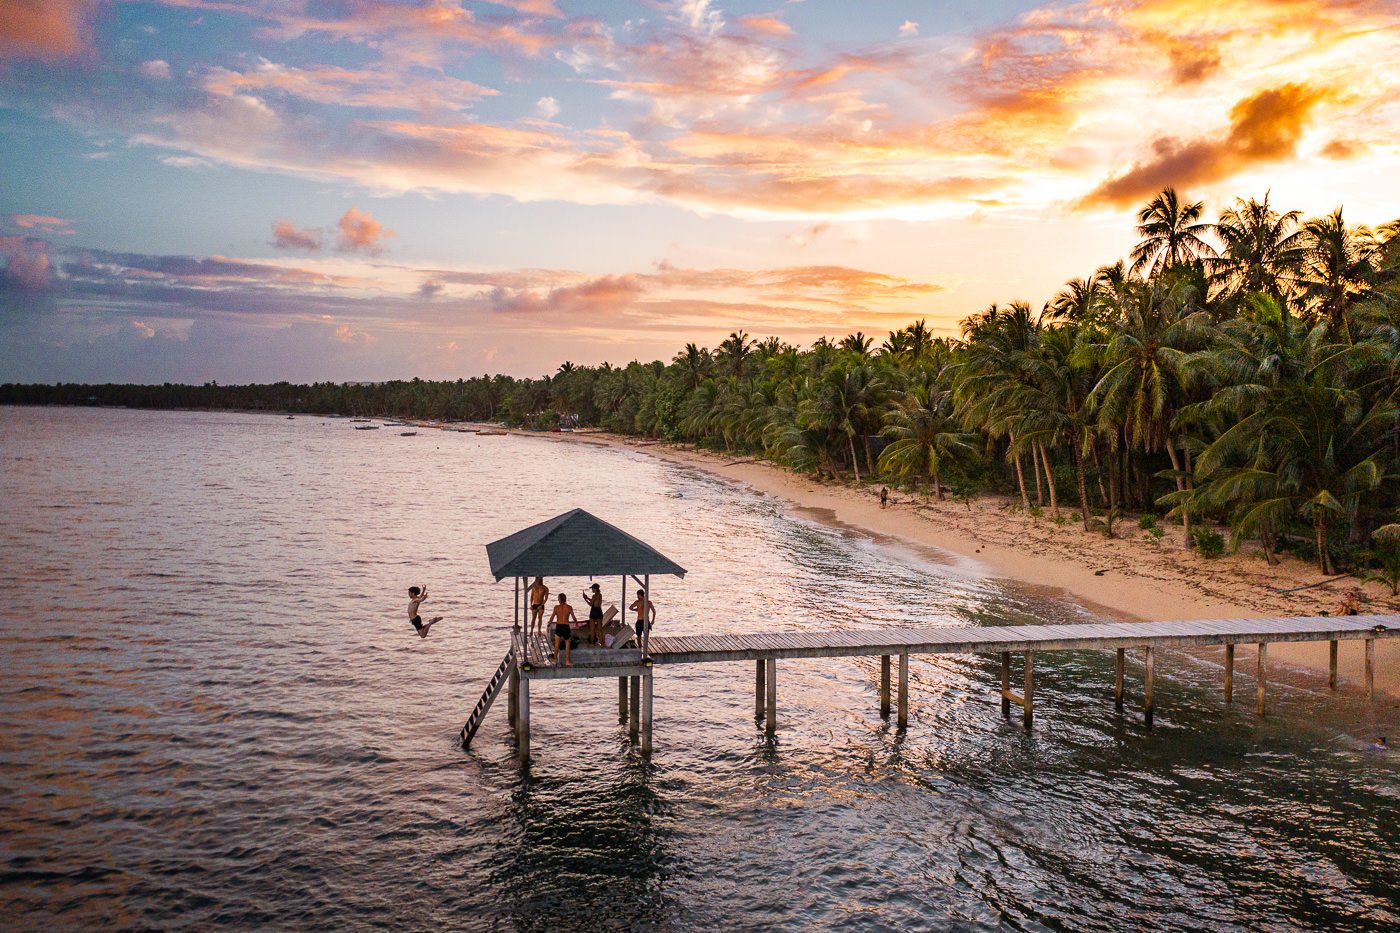 Siargao Travel Guide: 40 Awesome Things To Do On Siargao Island